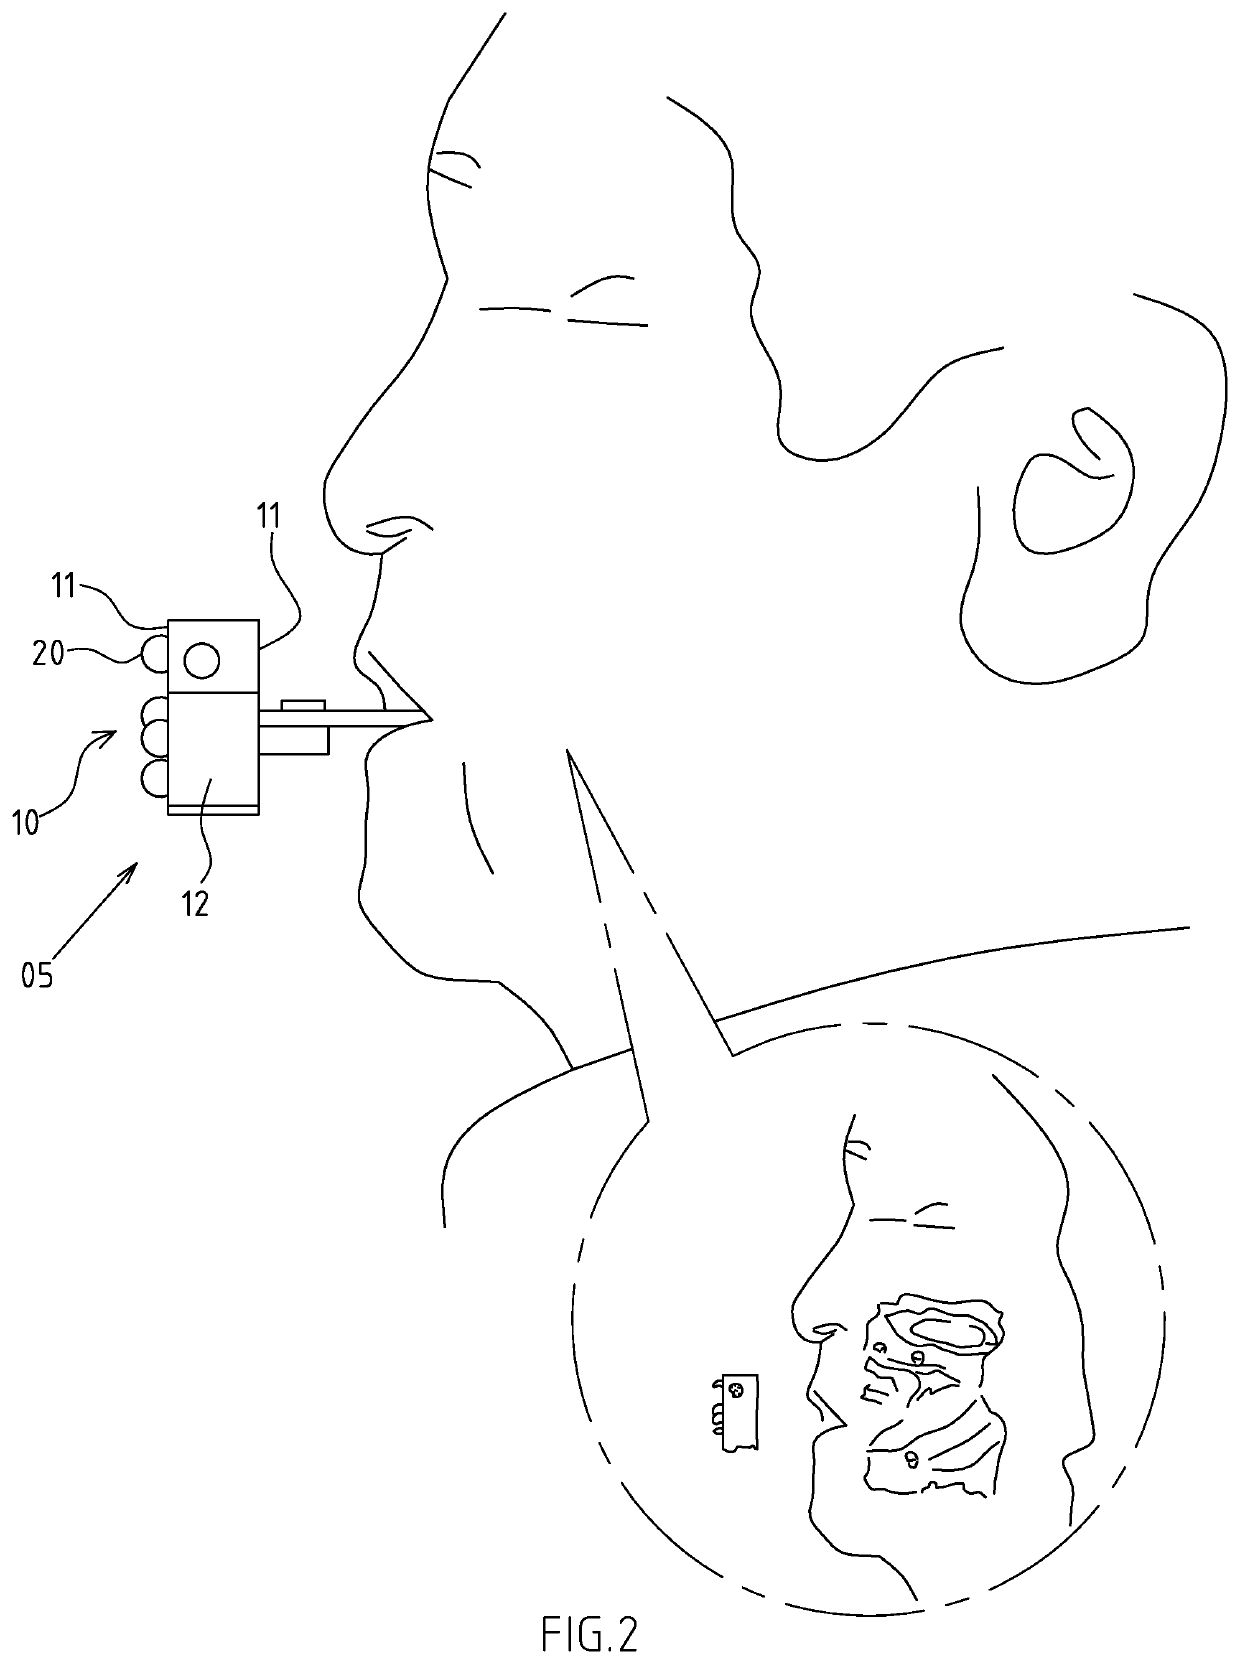 Face scanning and positioning structure used for full denture